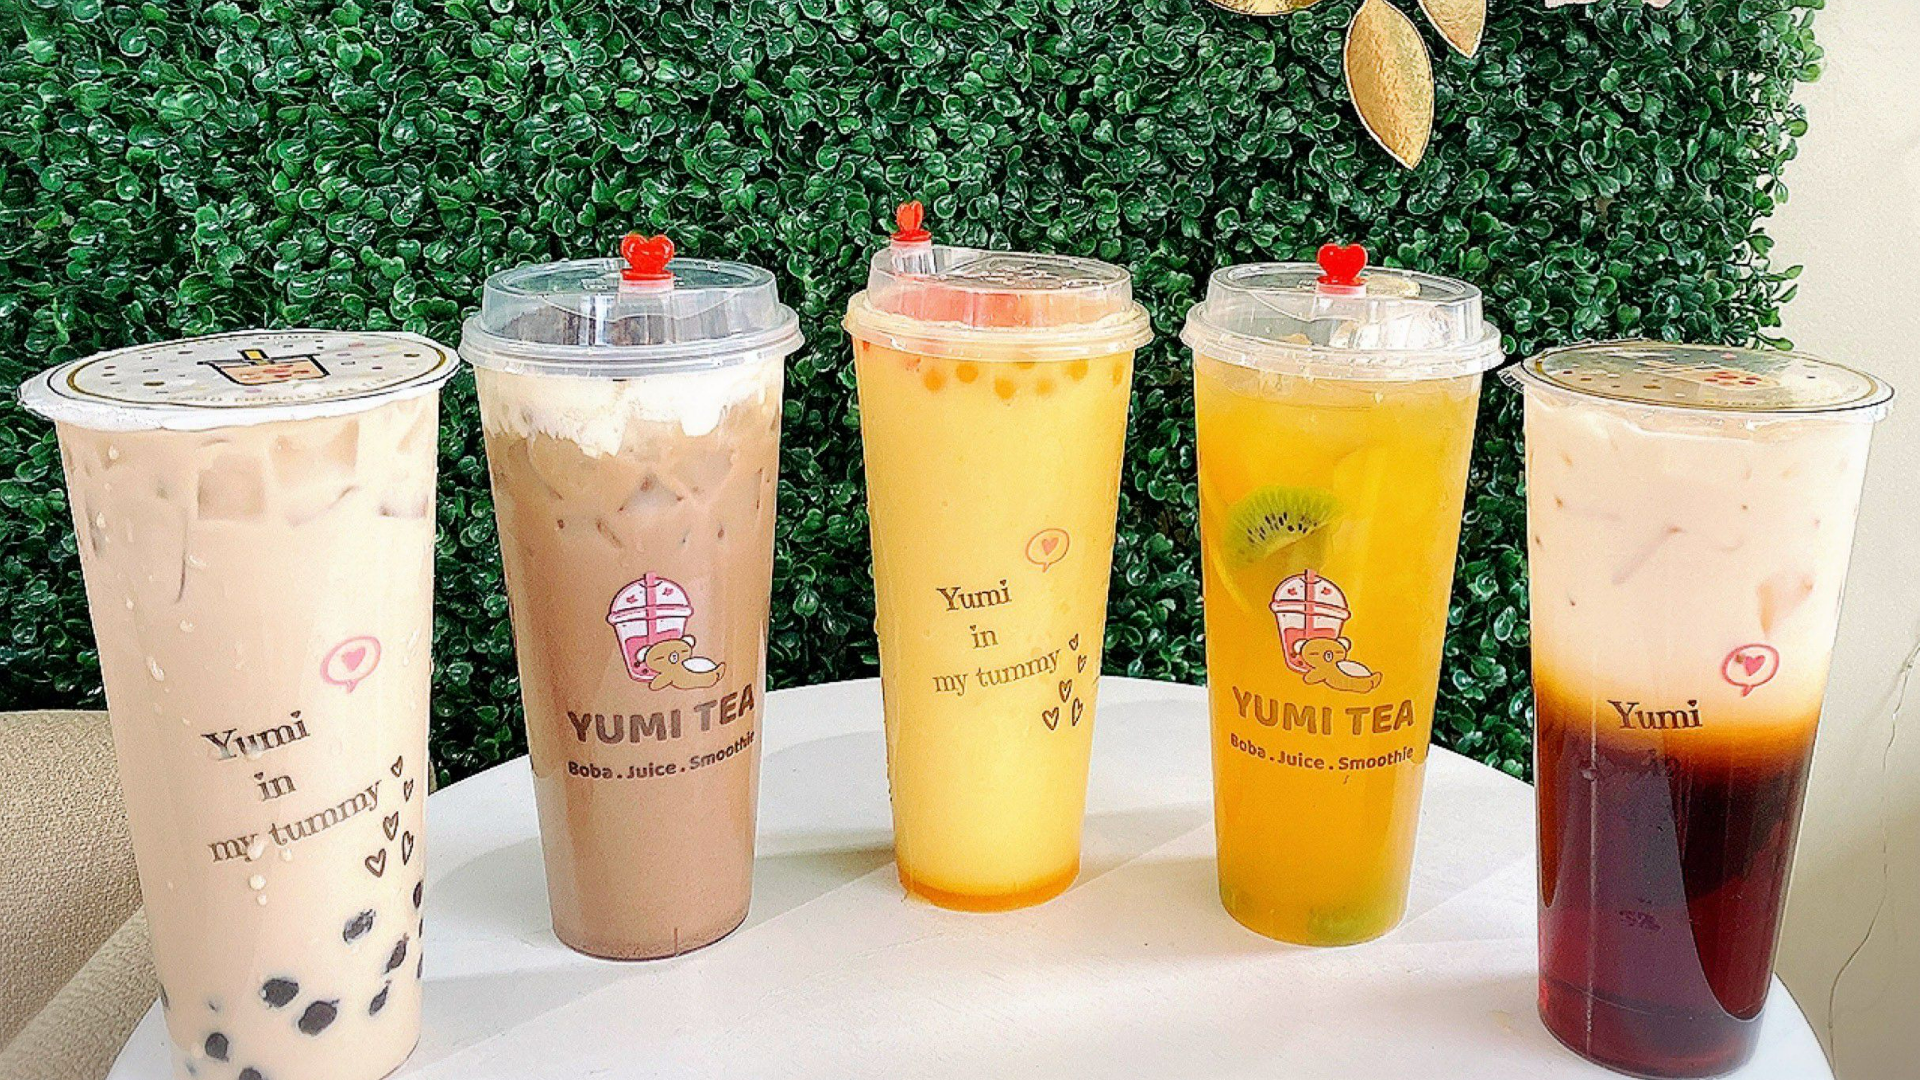 Yumi Boba Tea has opened a second location at 204 N. Springboro Pike in Miamisburg near the Dayton Mall.